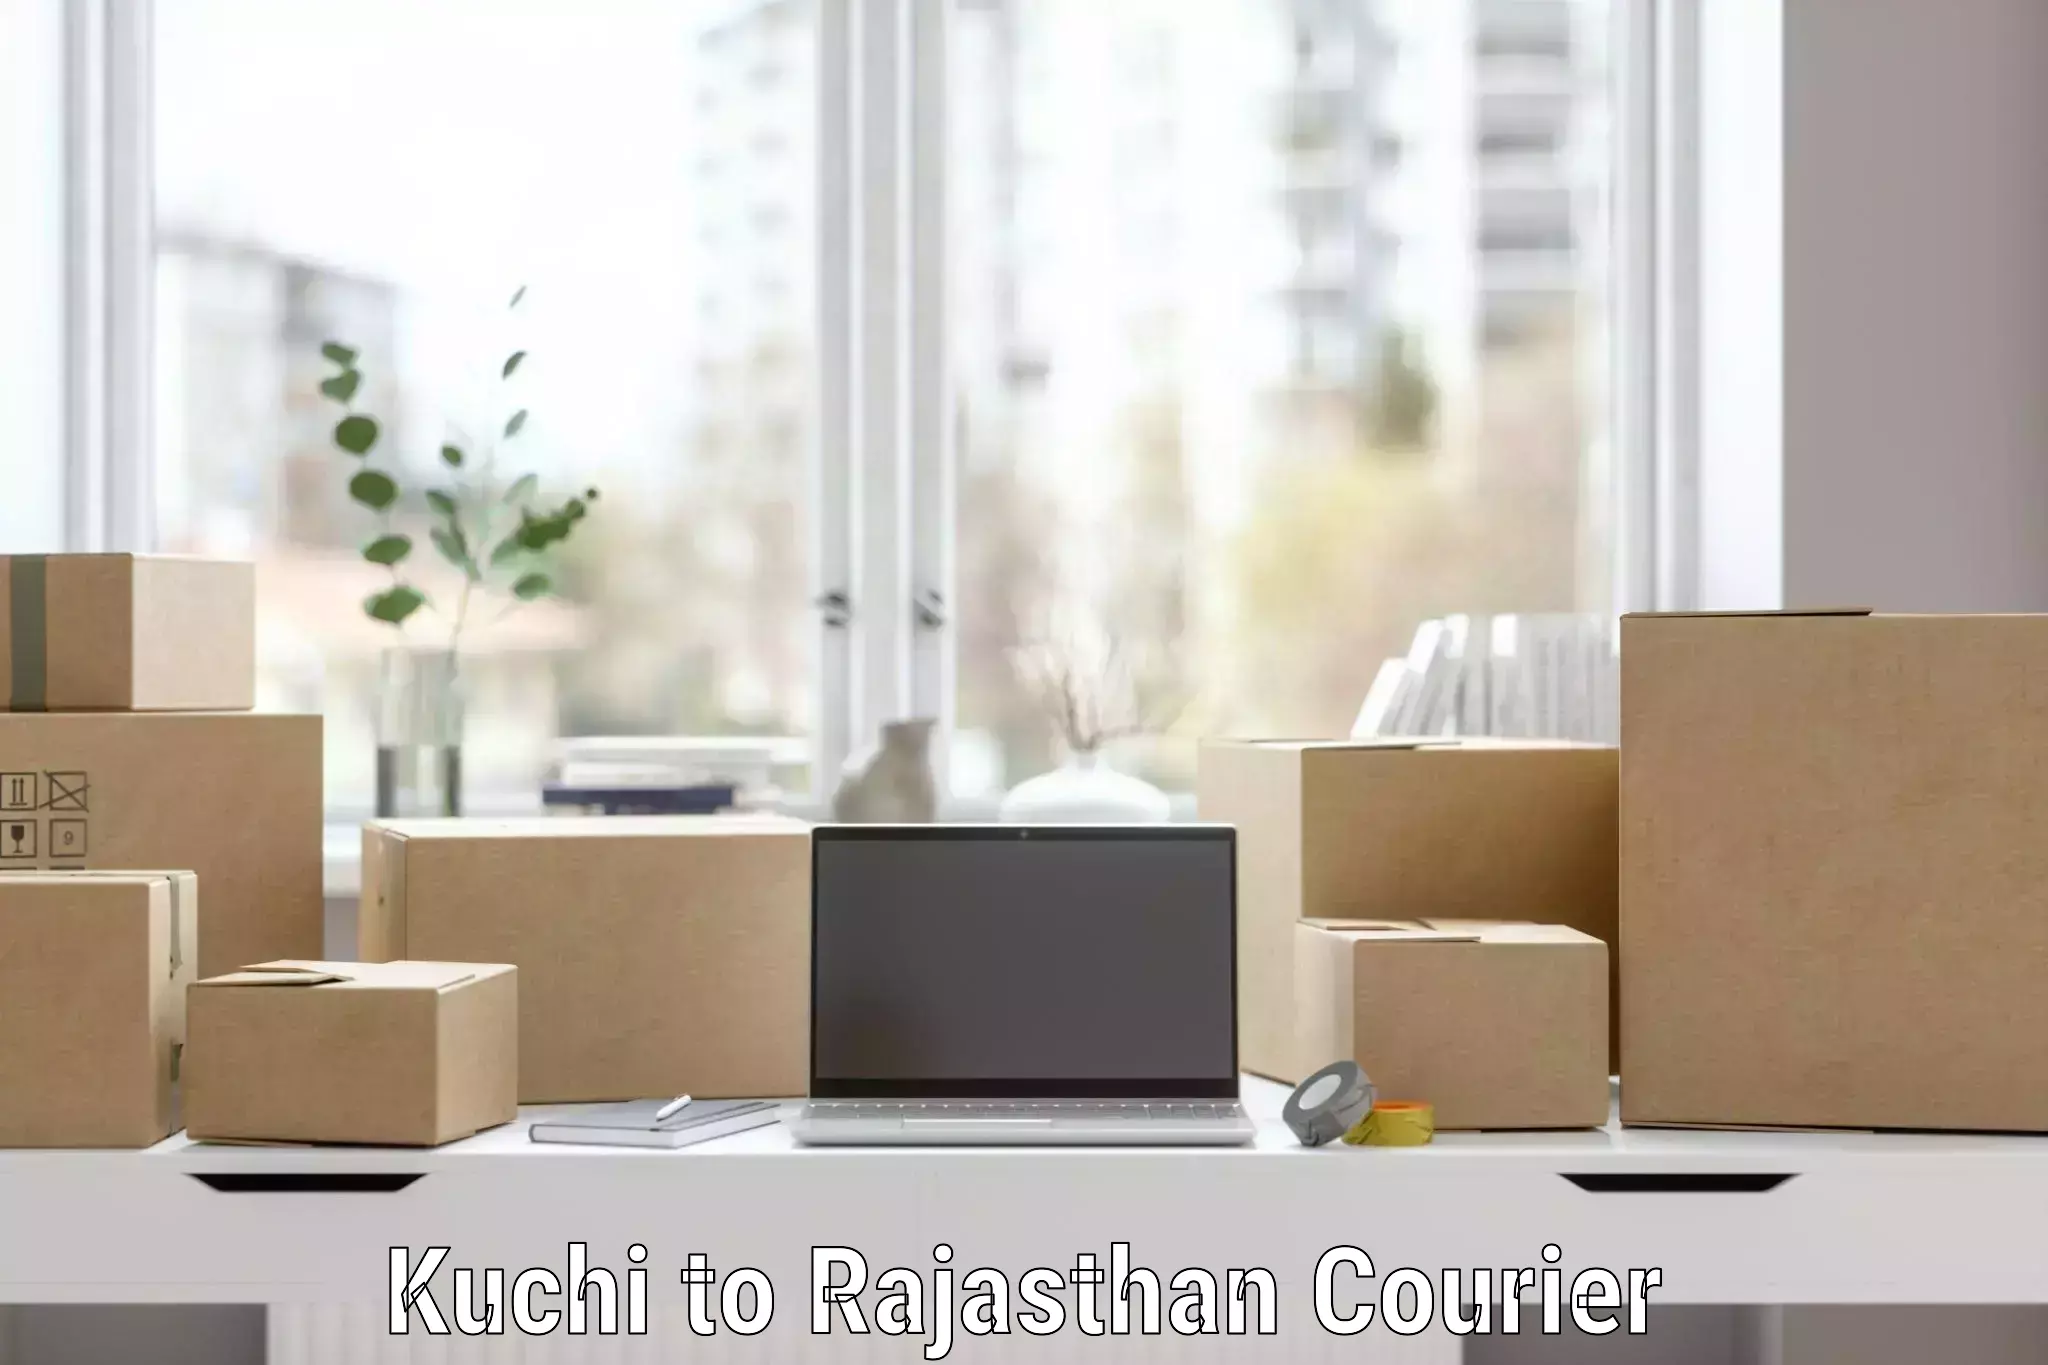 Quality moving services in Kuchi to Weir